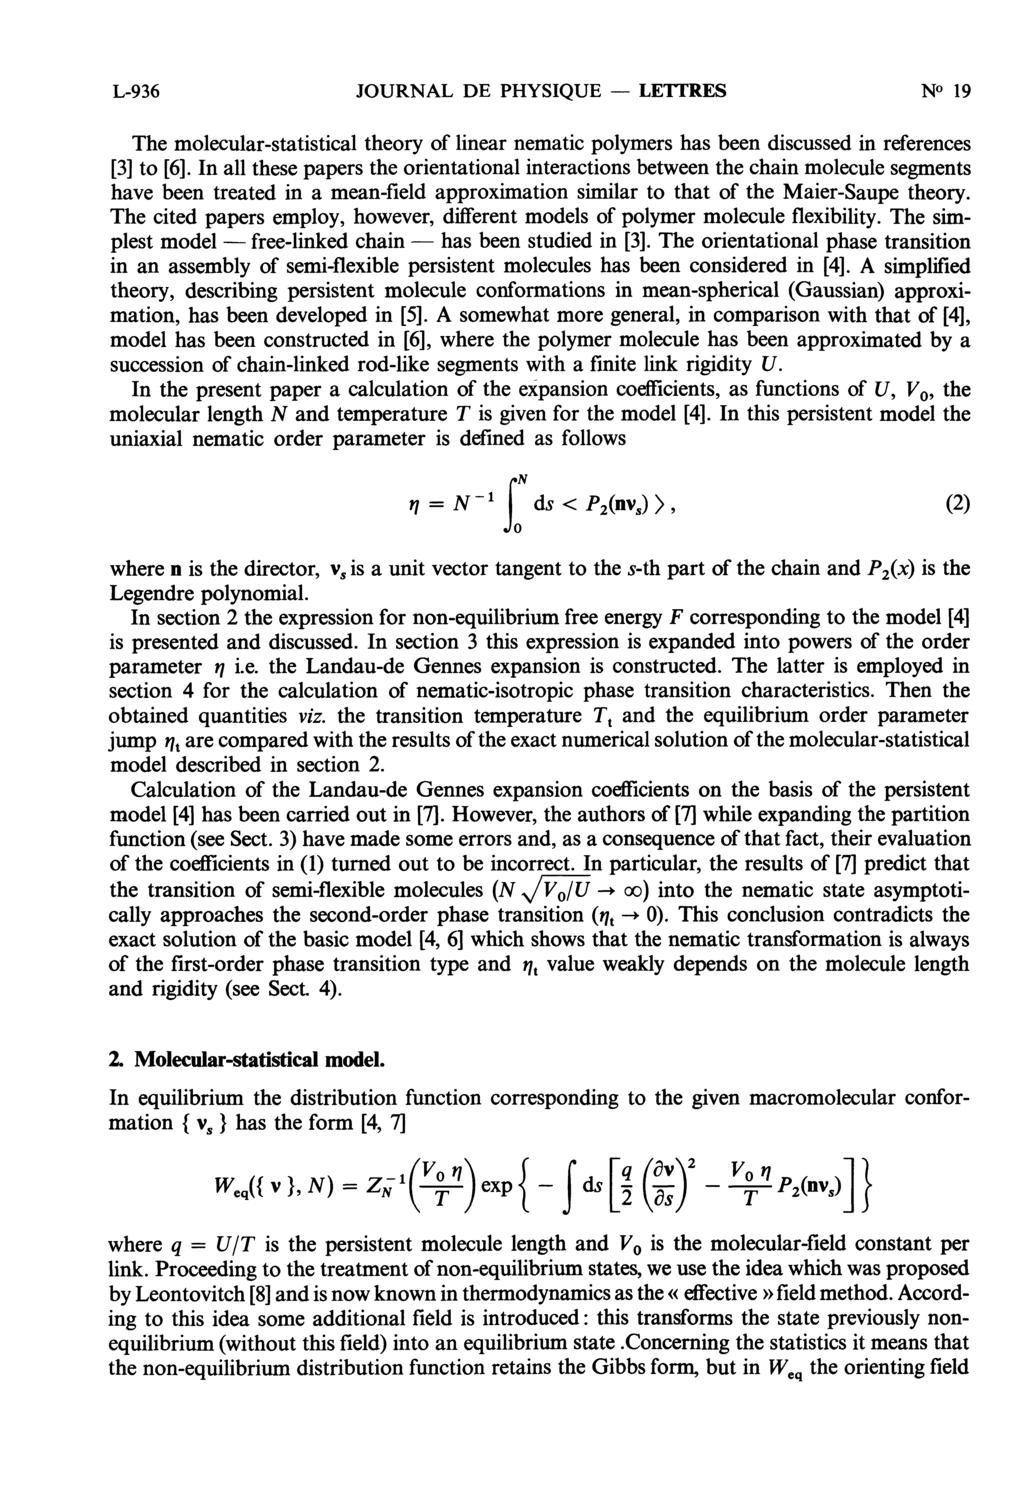 free-linked has L-936 JOURNAL DE PHYSIQUE - LETTRES The molecular-statistical theory of linear nematic polymers has been discussed in references [3] to [6].